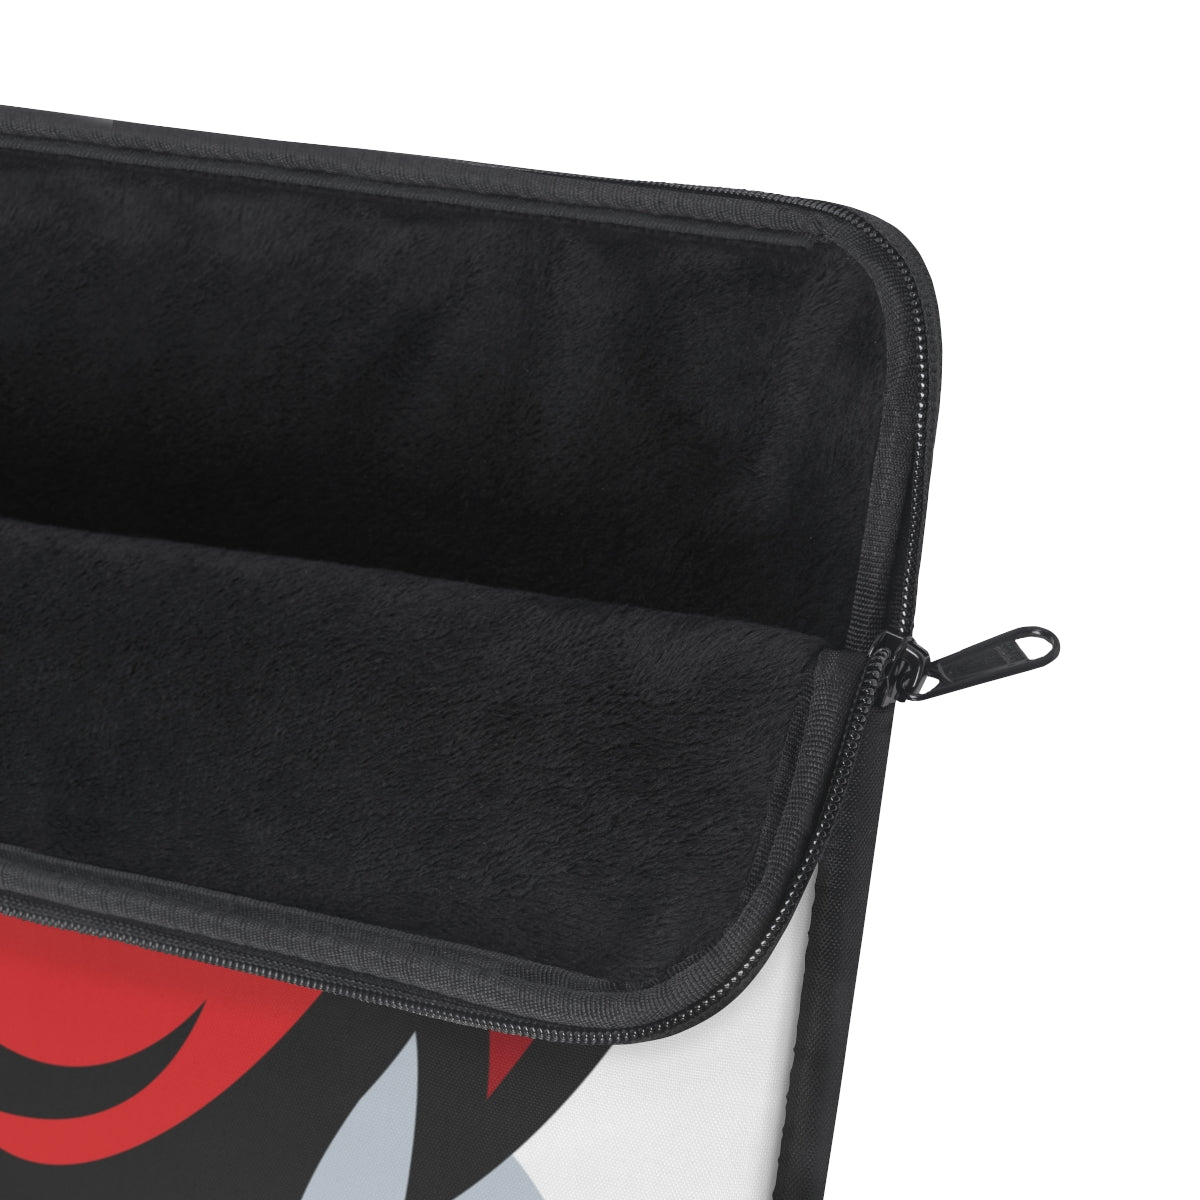 Randy's Spicy Cock Stare Laptop Sleeve